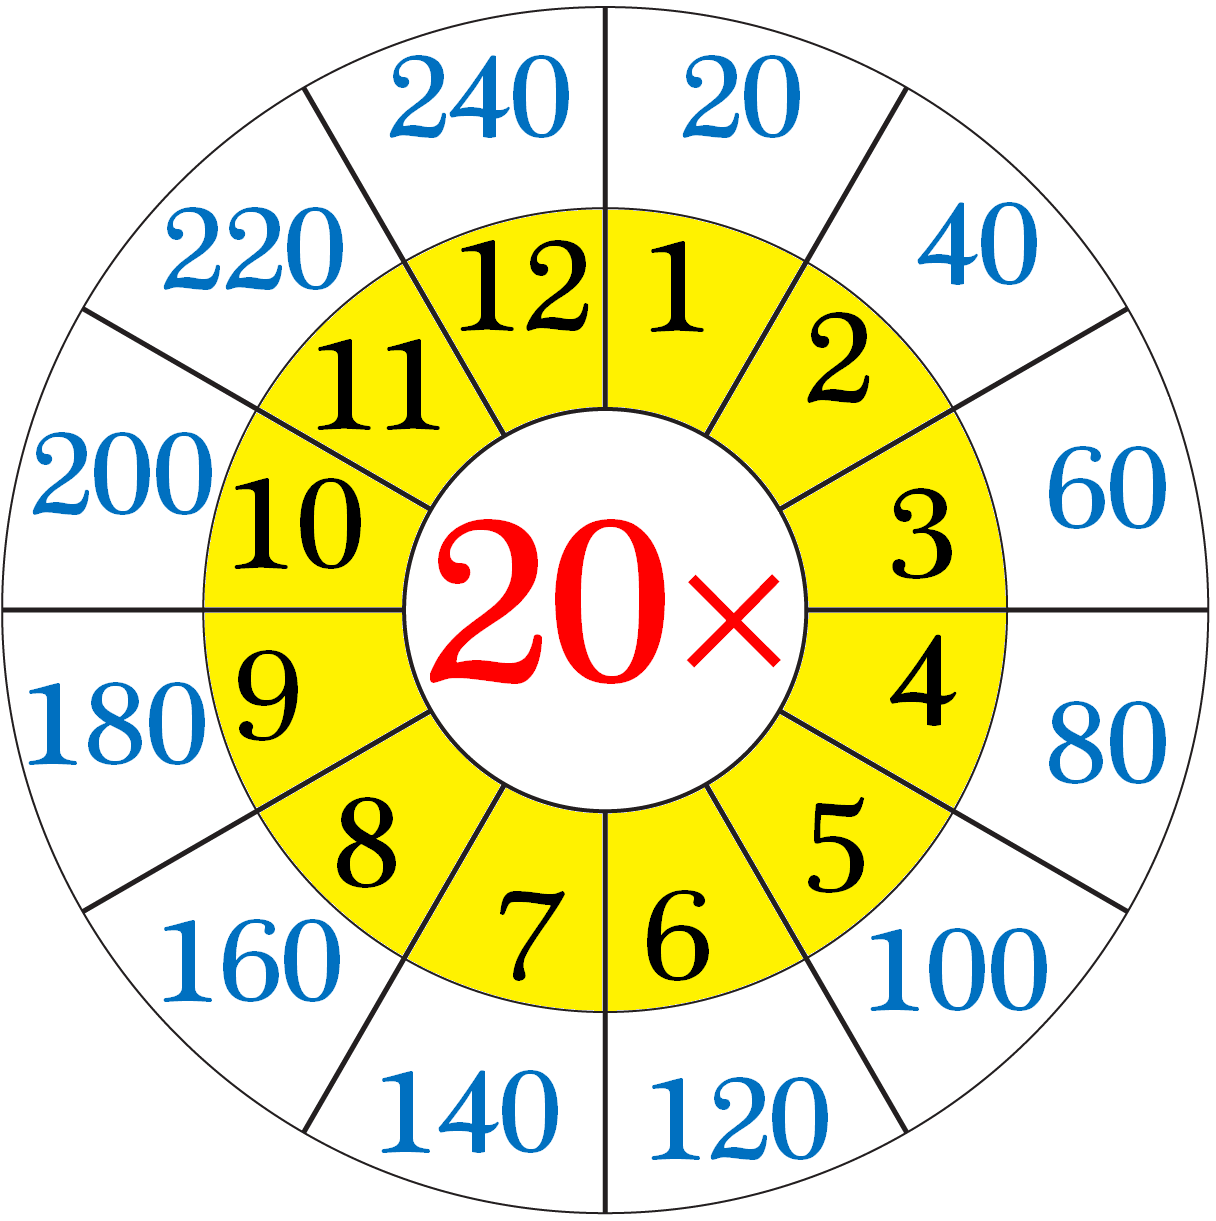 Multiplication Table of 20